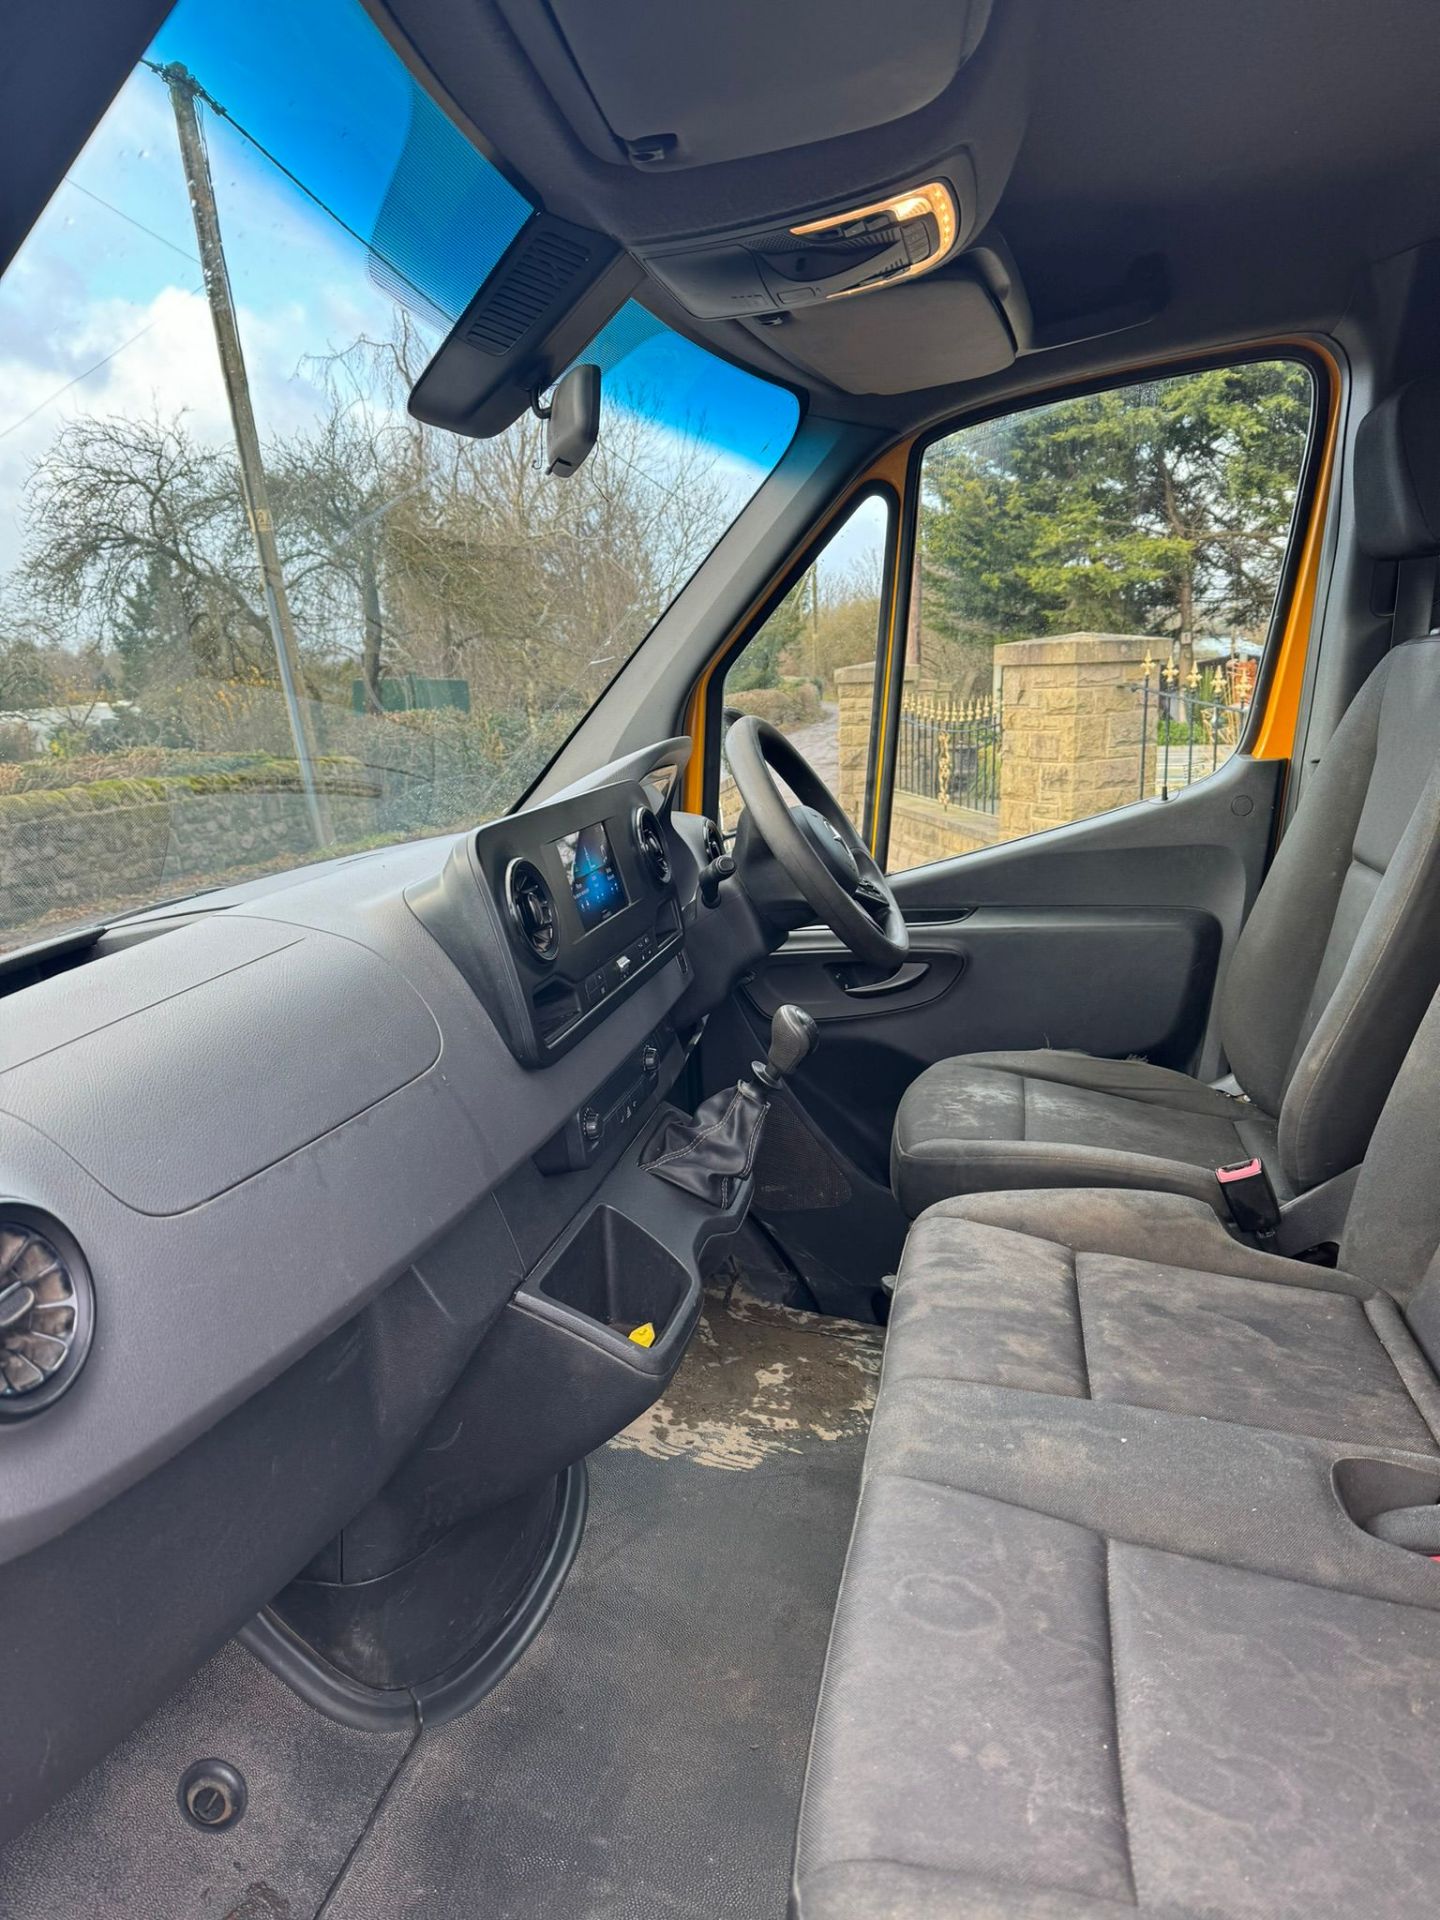 2019 MERCEDES BENZ 314 MWB SPRINTER WITH 1000 LTR TOILET SUCTION EQUIPMENT FITTED *PLUS VAT* - Image 18 of 18